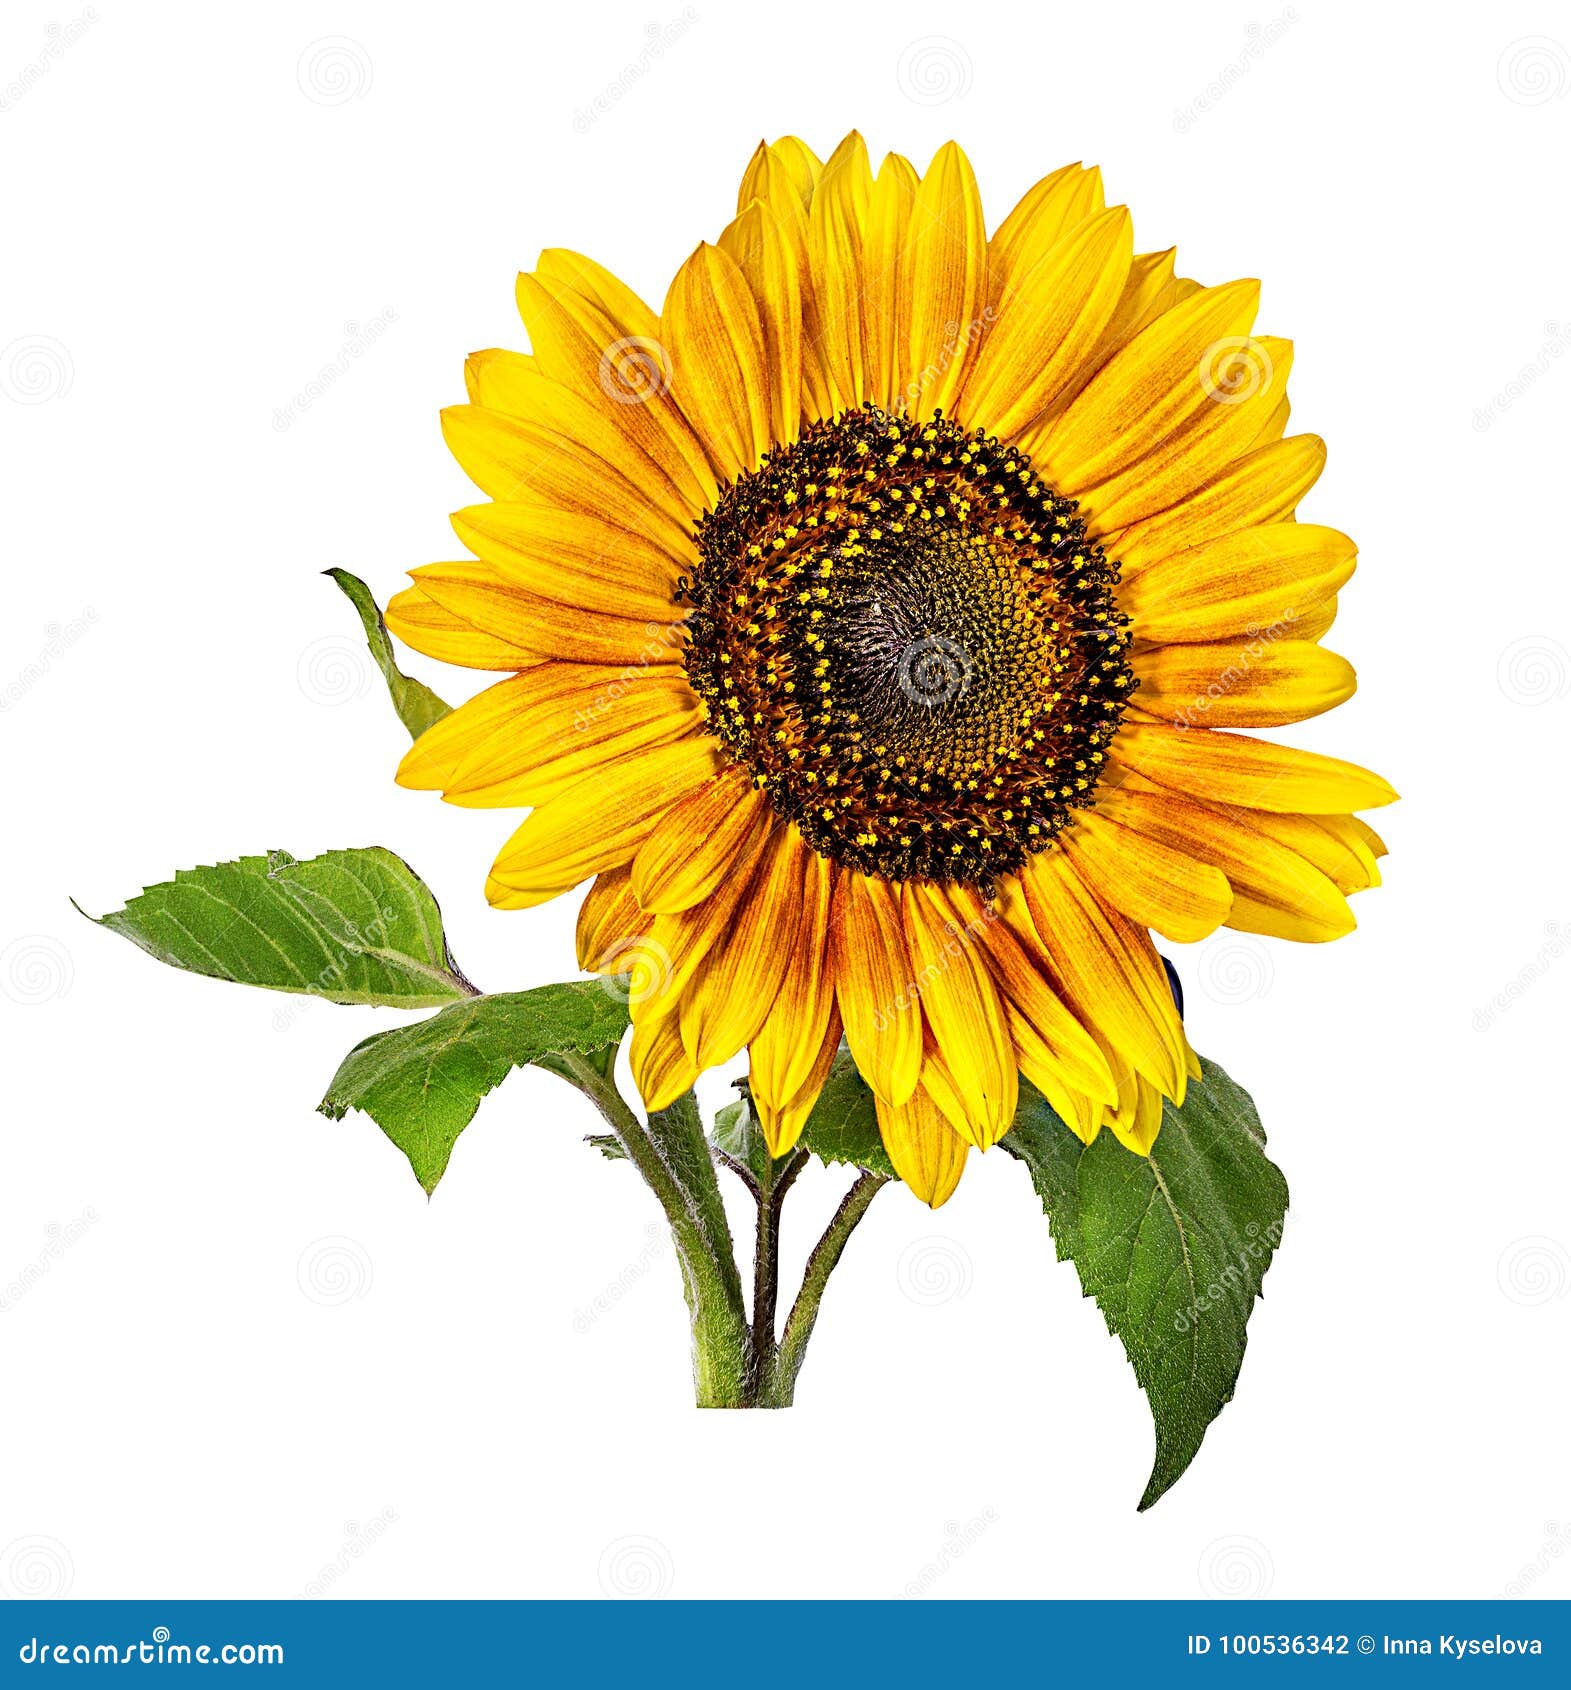 Sunflower Isolated on White Stock Photo - Image of plant, agriculture